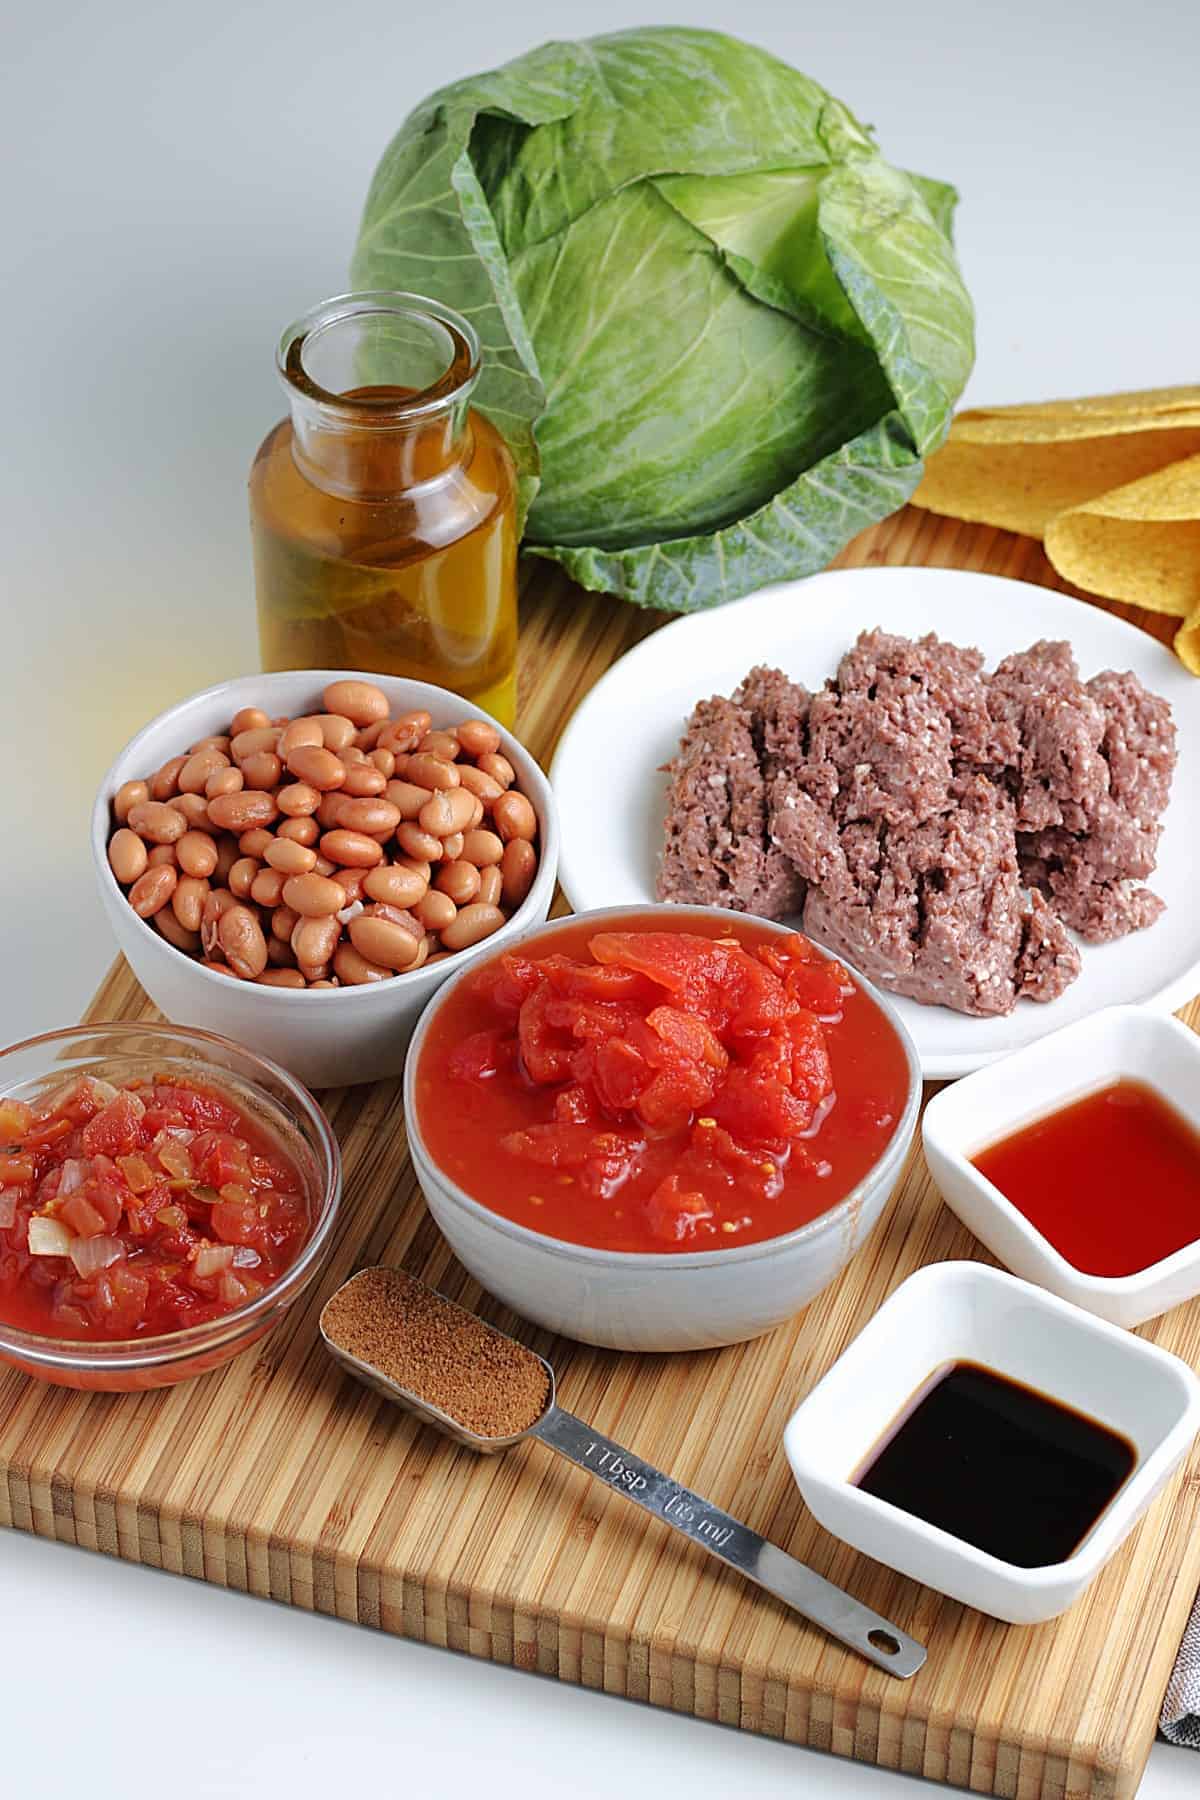 All of the ingredients for great sloppy tacos.